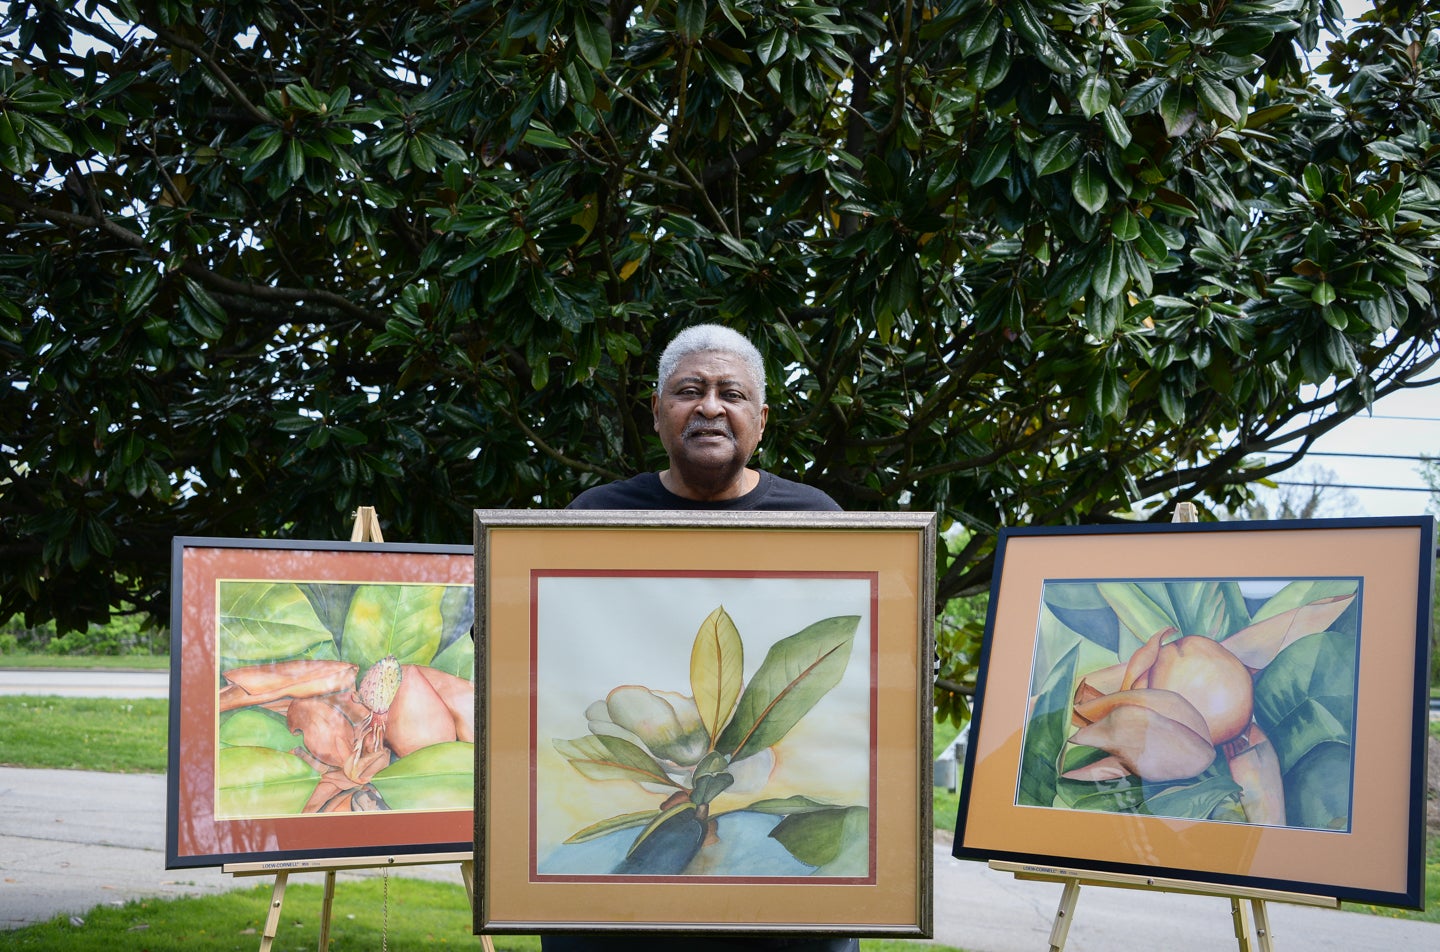 Lifelong passion: Charles H. Robinson fascinated with art